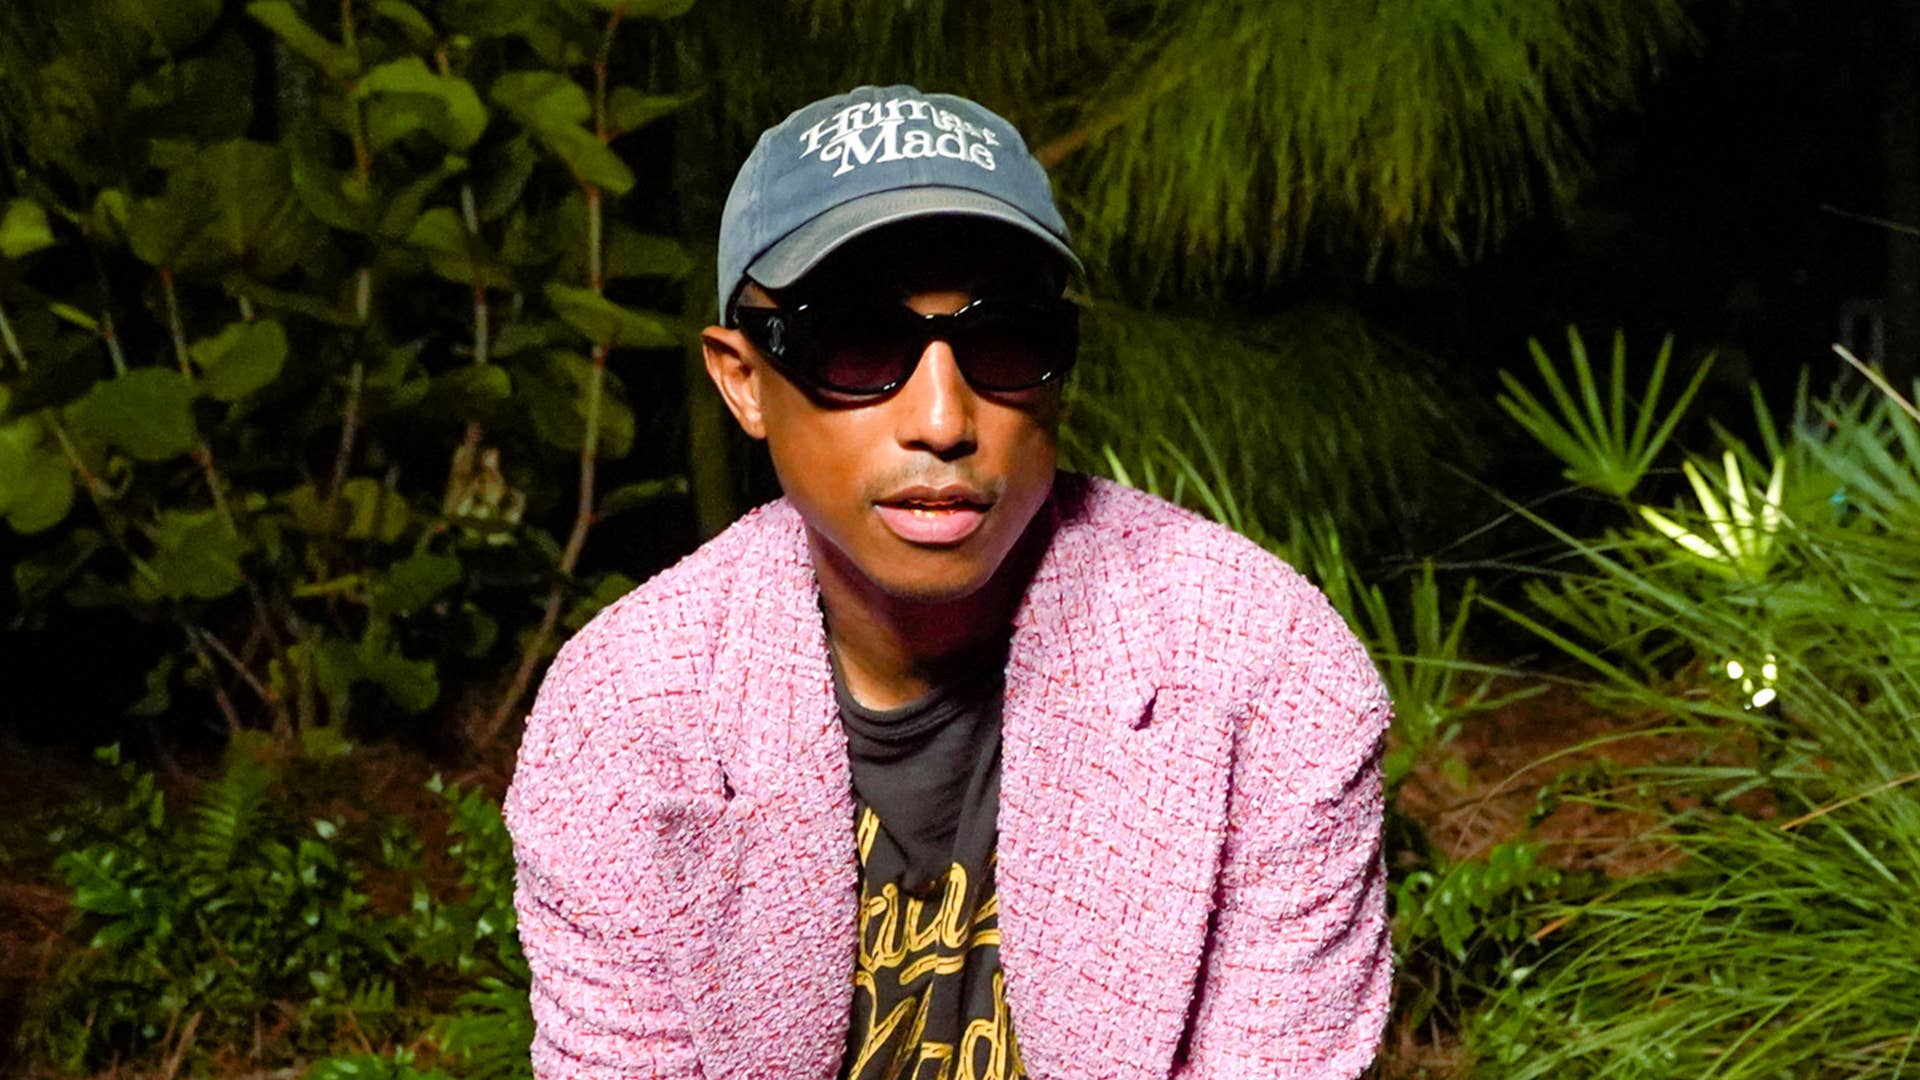 Pharrell Williams wearing a pink jacket and sunglasses